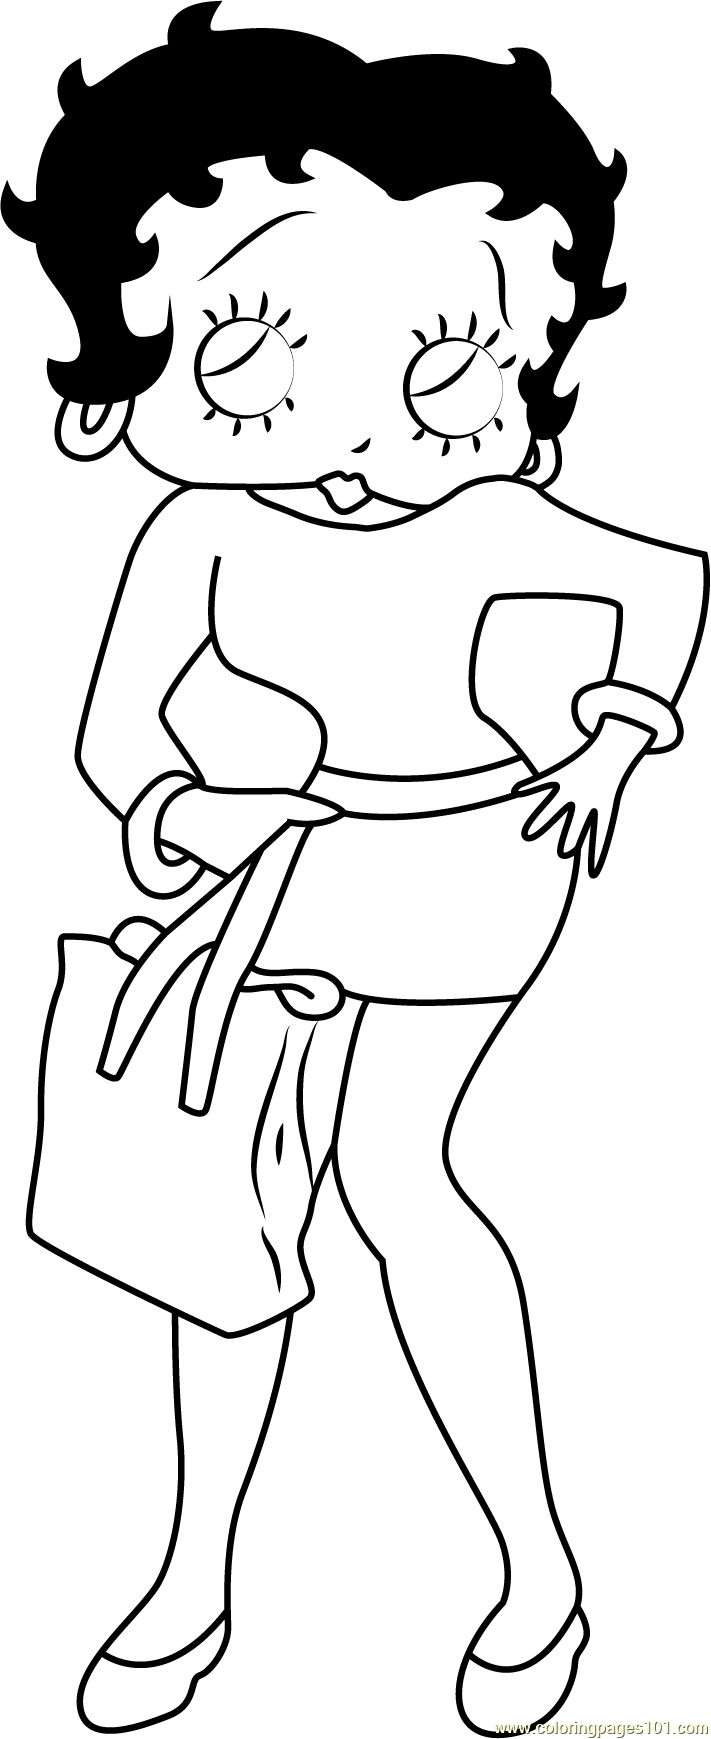 Betty Coloring Page - Free Betty Boop Coloring Pages : ColoringPages101.com